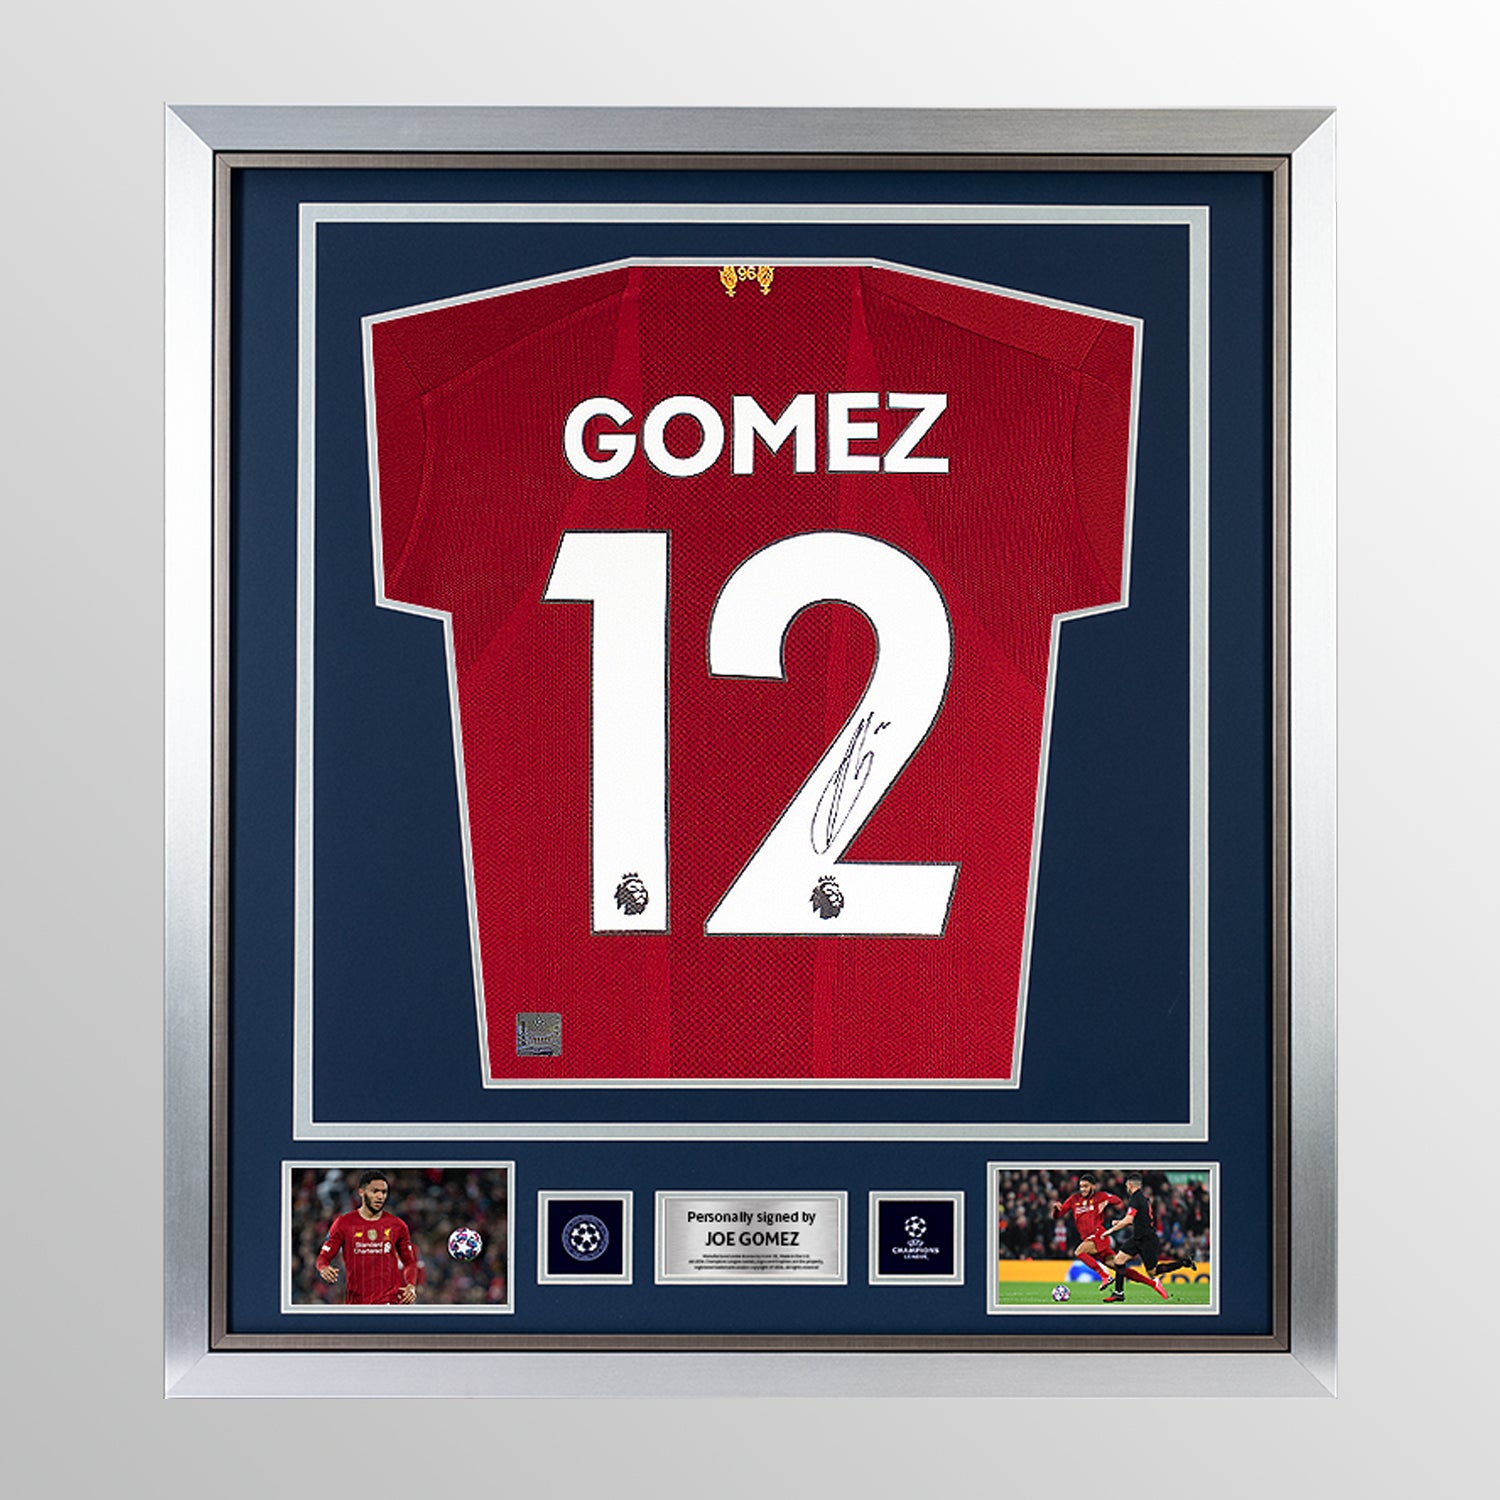 Joe Gomez Official UEFA Champions League Back Signed and Framed Liverpool 2019-20 Home Shirt UEFA Club Competitions Online Store